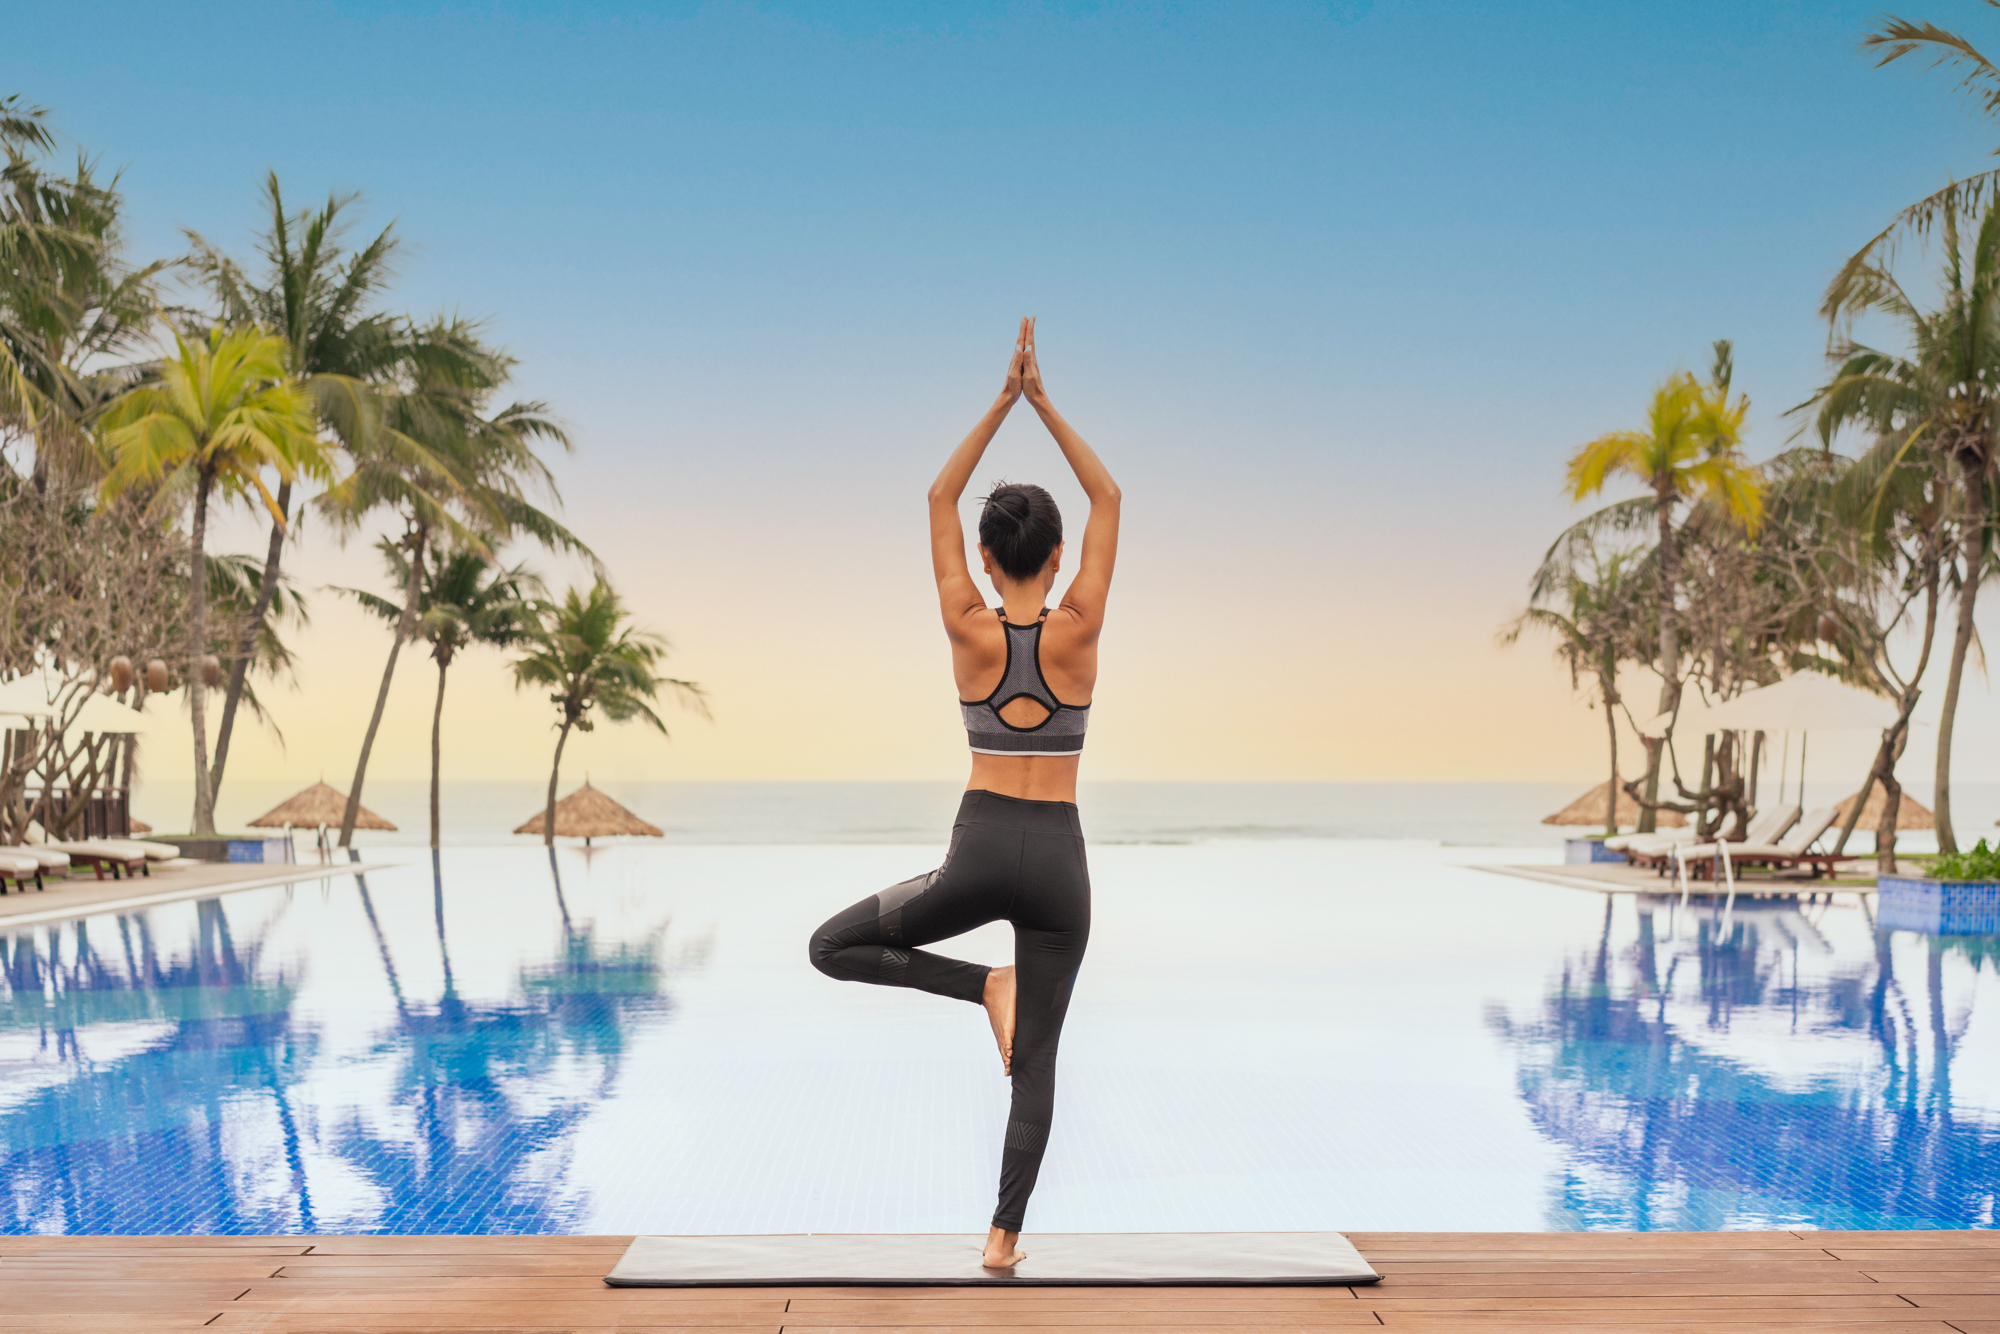 Sunrise yoga by the poolside at a luxury beach resort